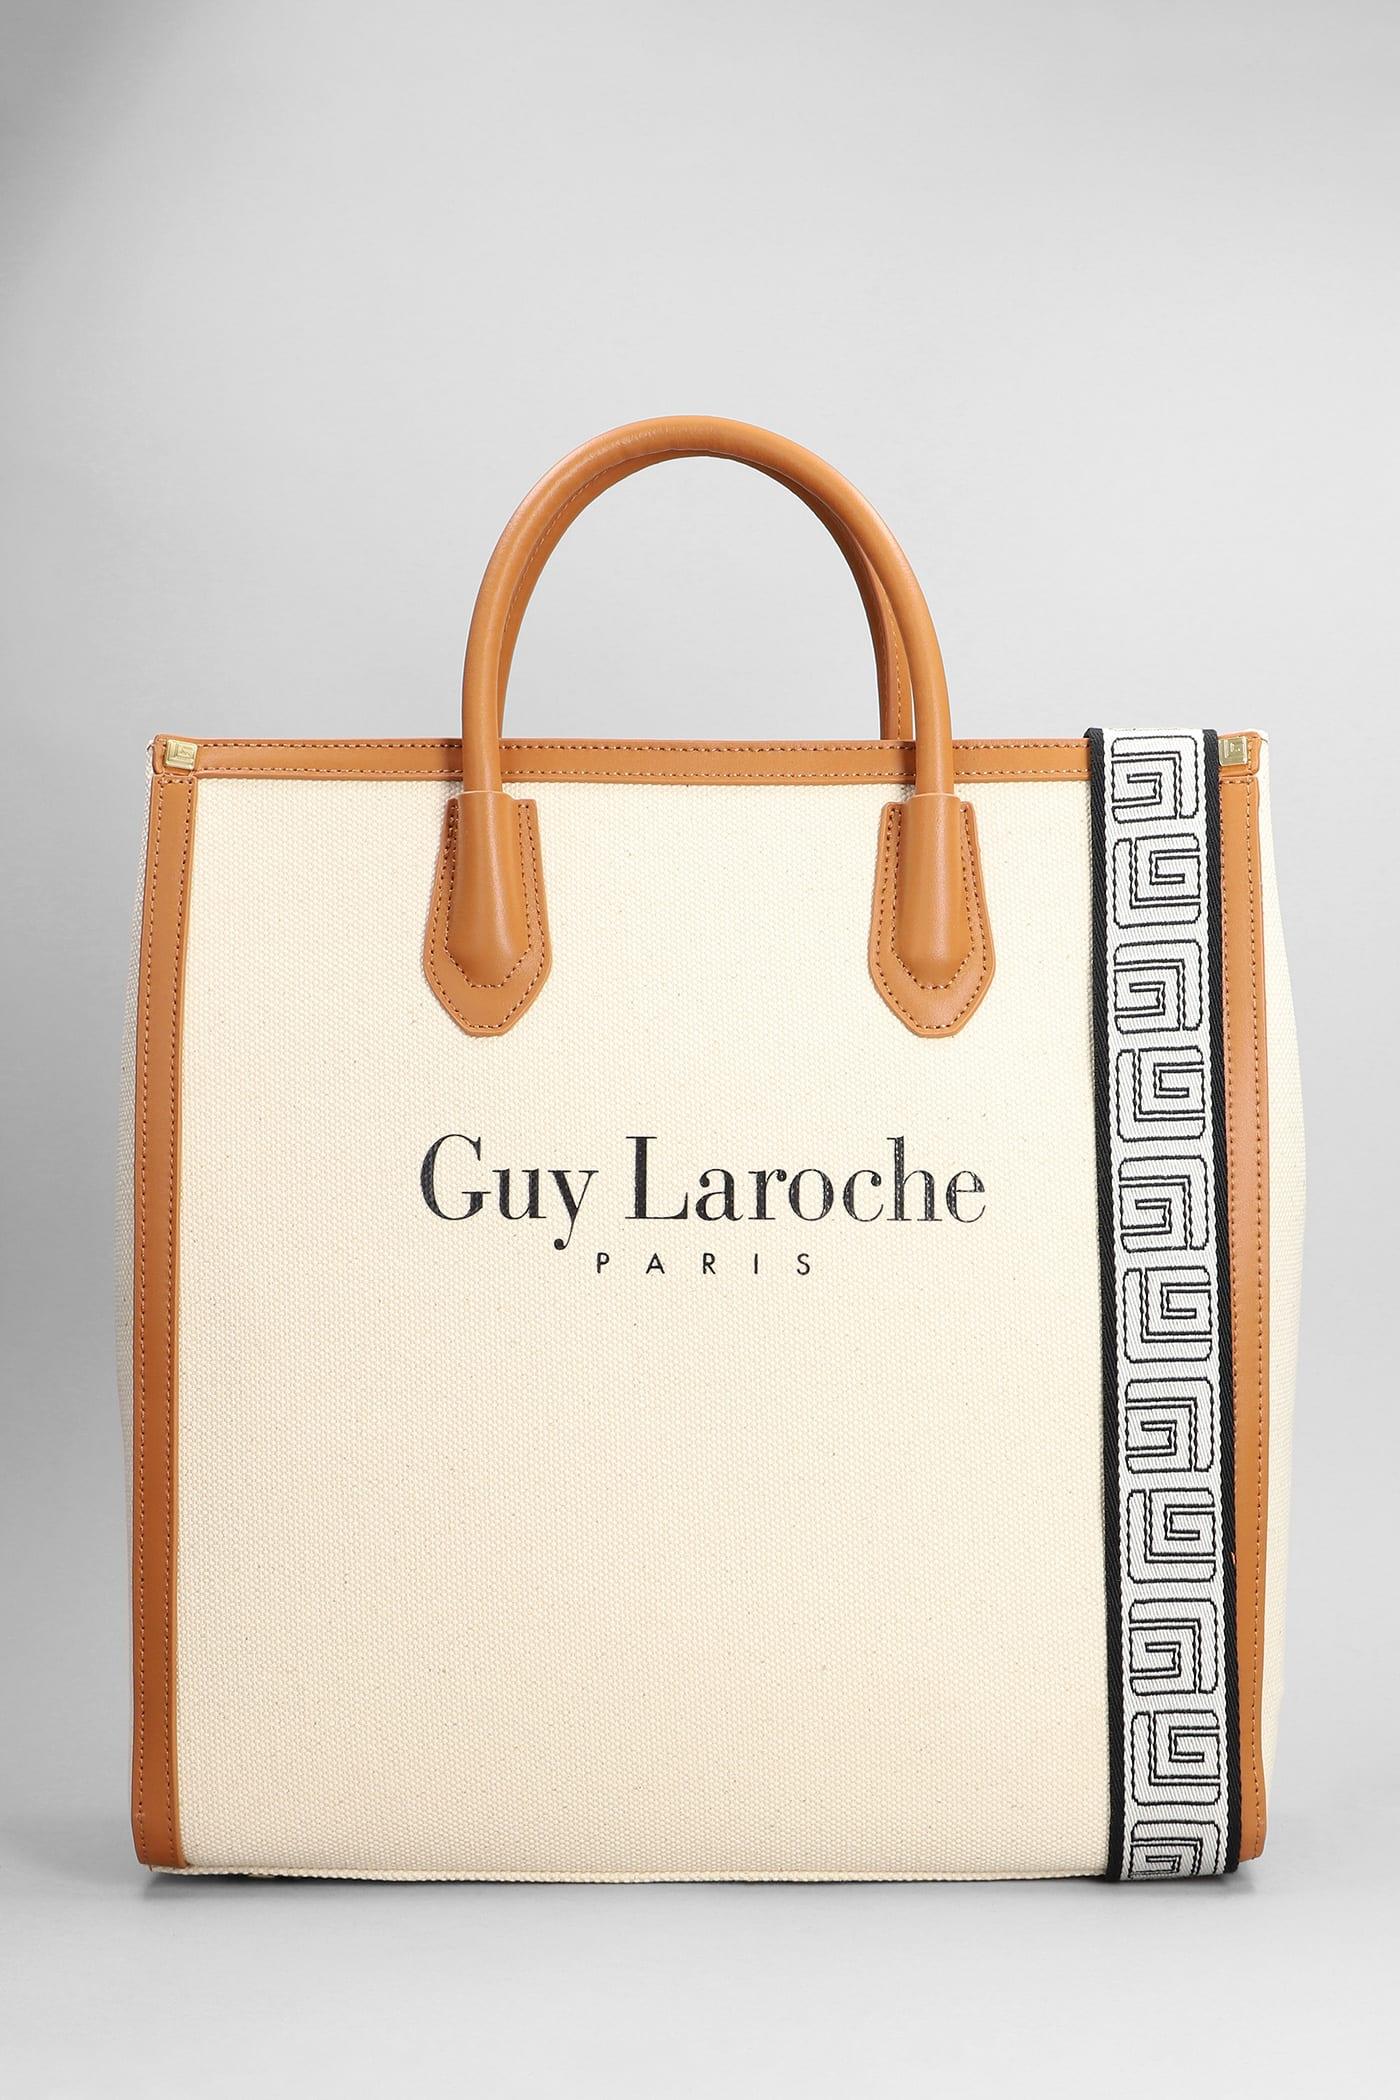 Guy Laroche Hand Bag In Beige Canvas in Natural | Lyst